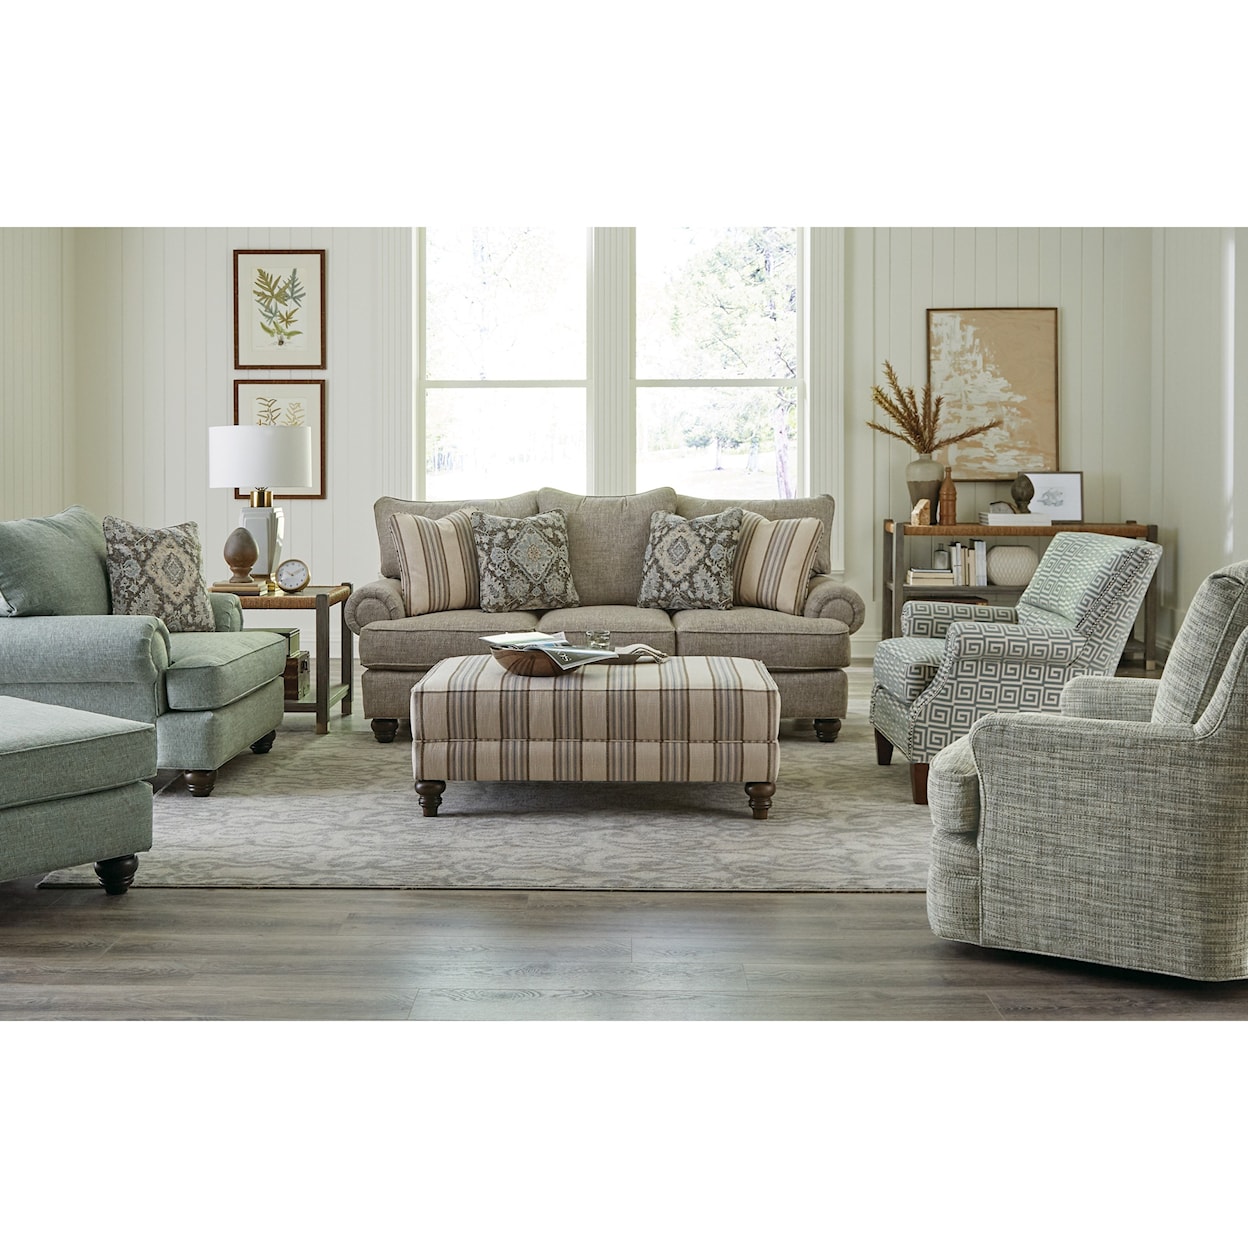 Craftmaster 700450 Living Room Group